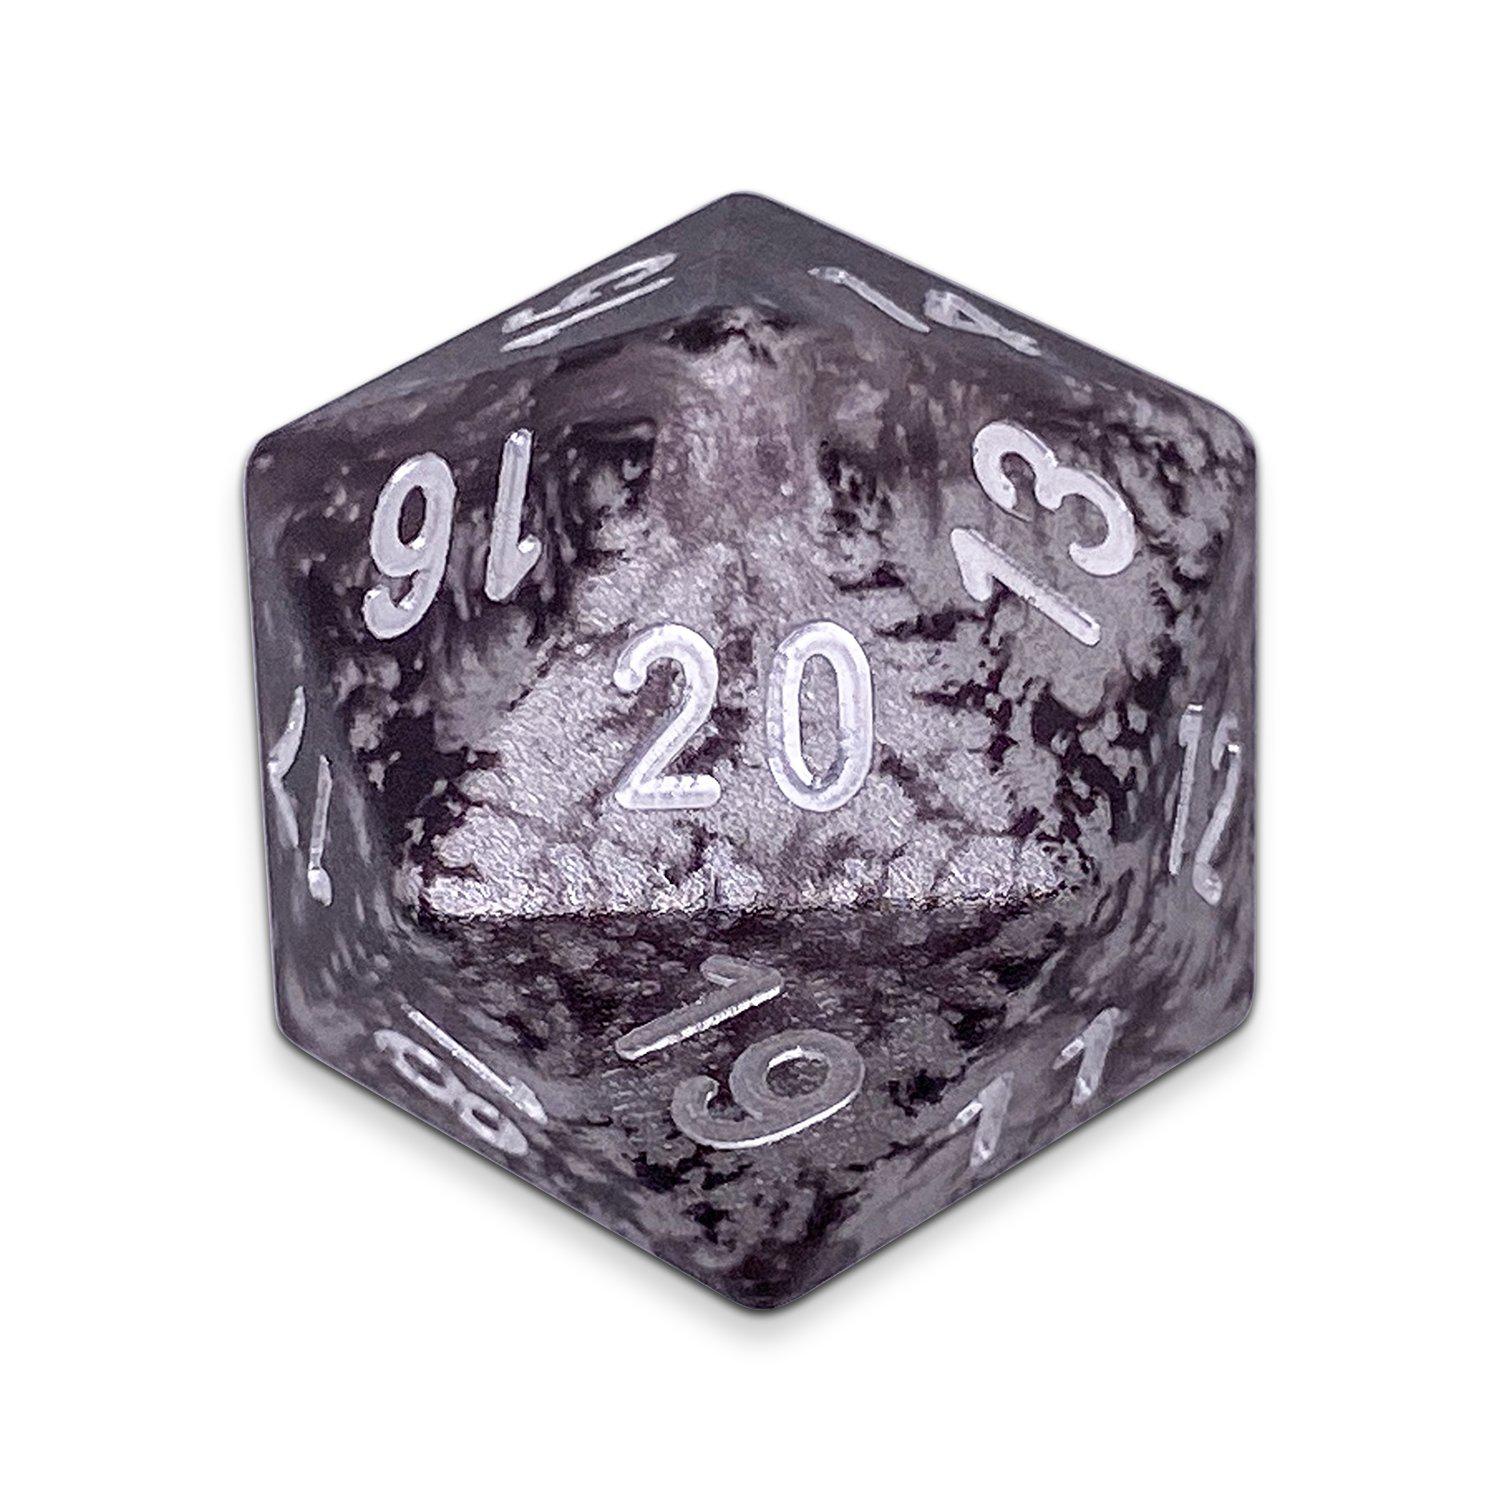 Single Wondrous Dice® Countdown D20 in Mummy Lord by Norse Foundry 6063 Aircraft Grade Aluminum - NOR 02448